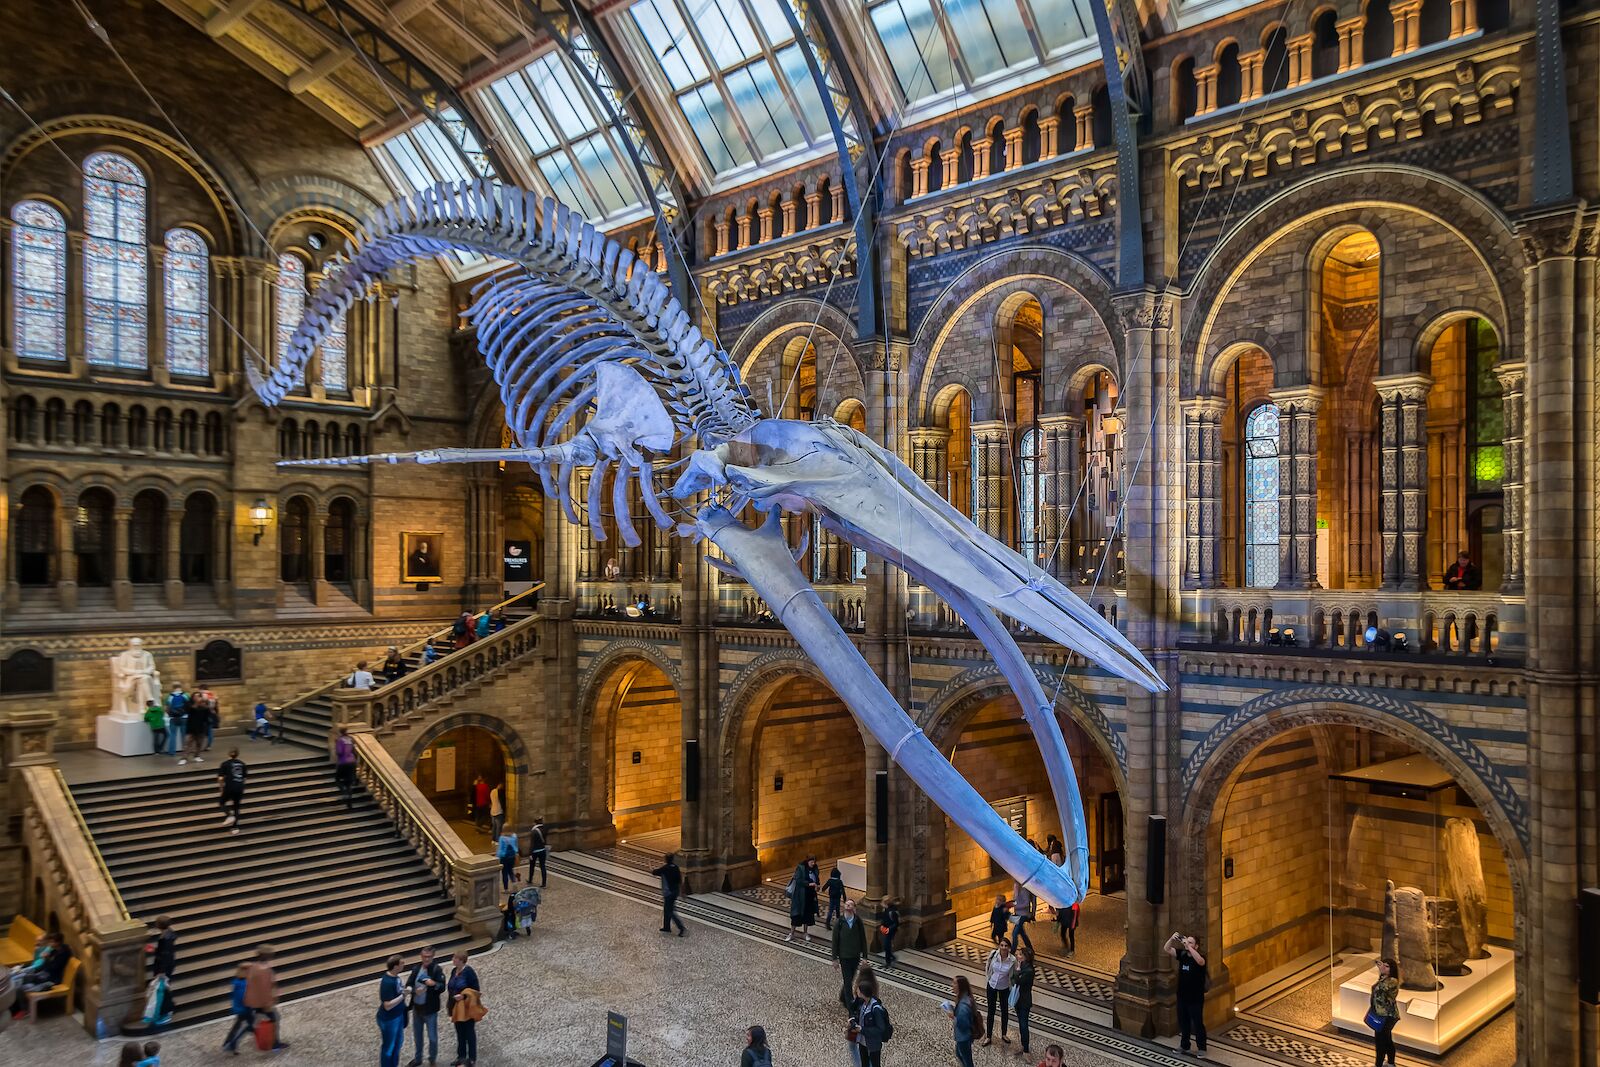 Inside the Natural History Museum in London